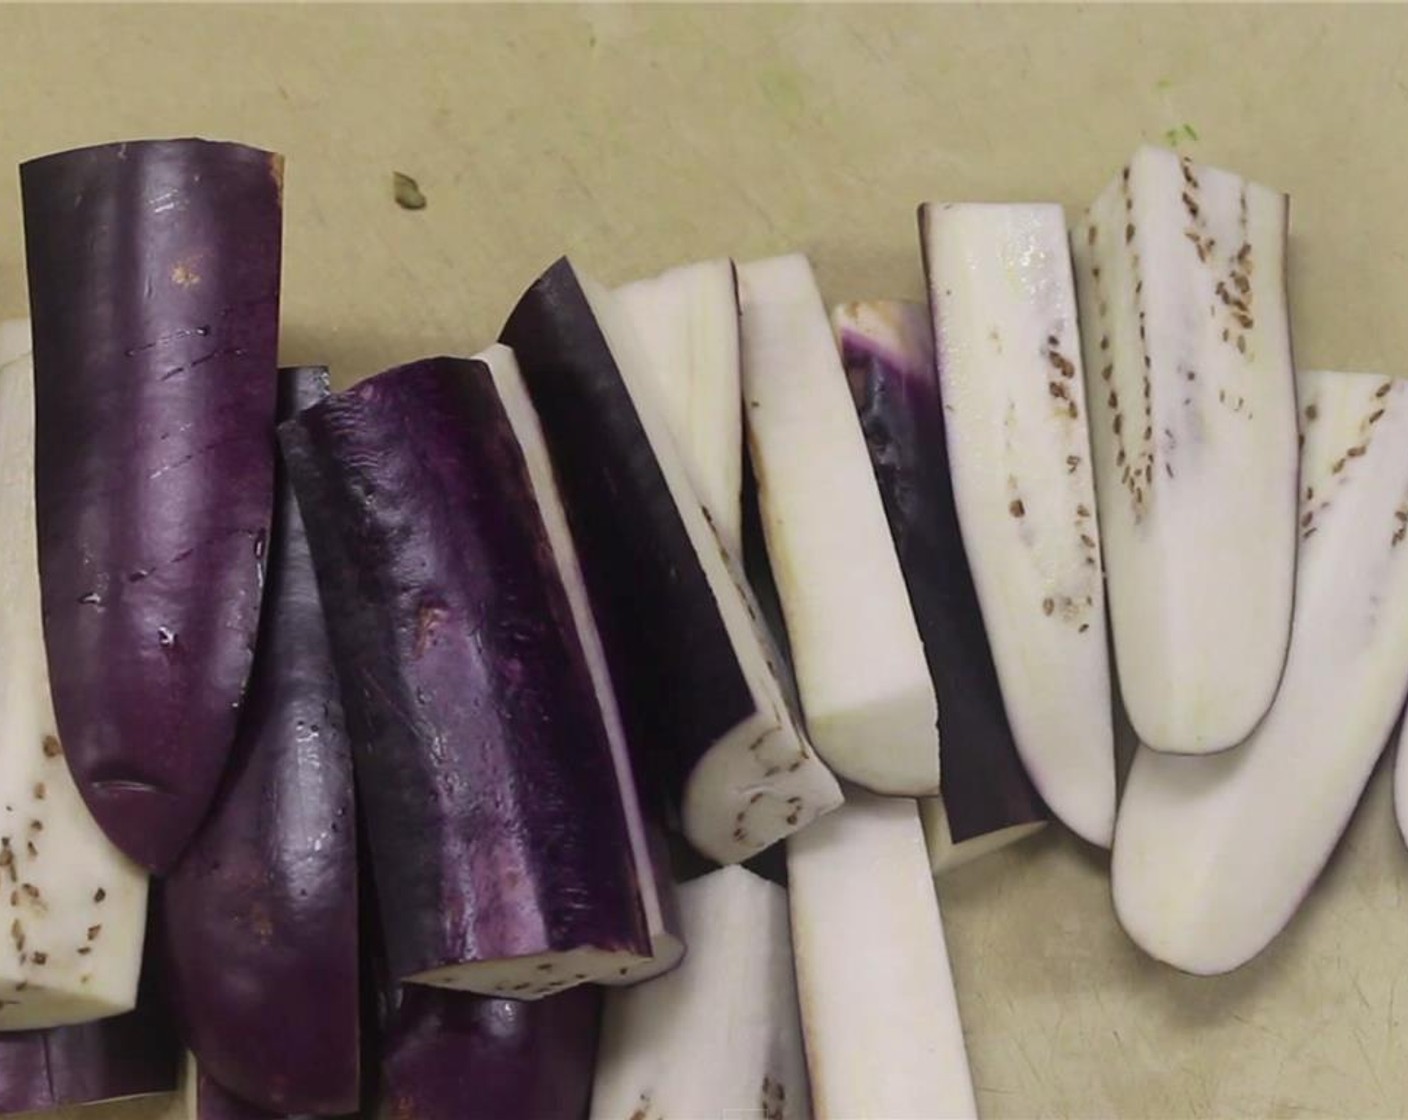 step 9 Trim off the ends of the Eggplants (2) and cut into approximately 4-5 inch portions, then cut into quarters.